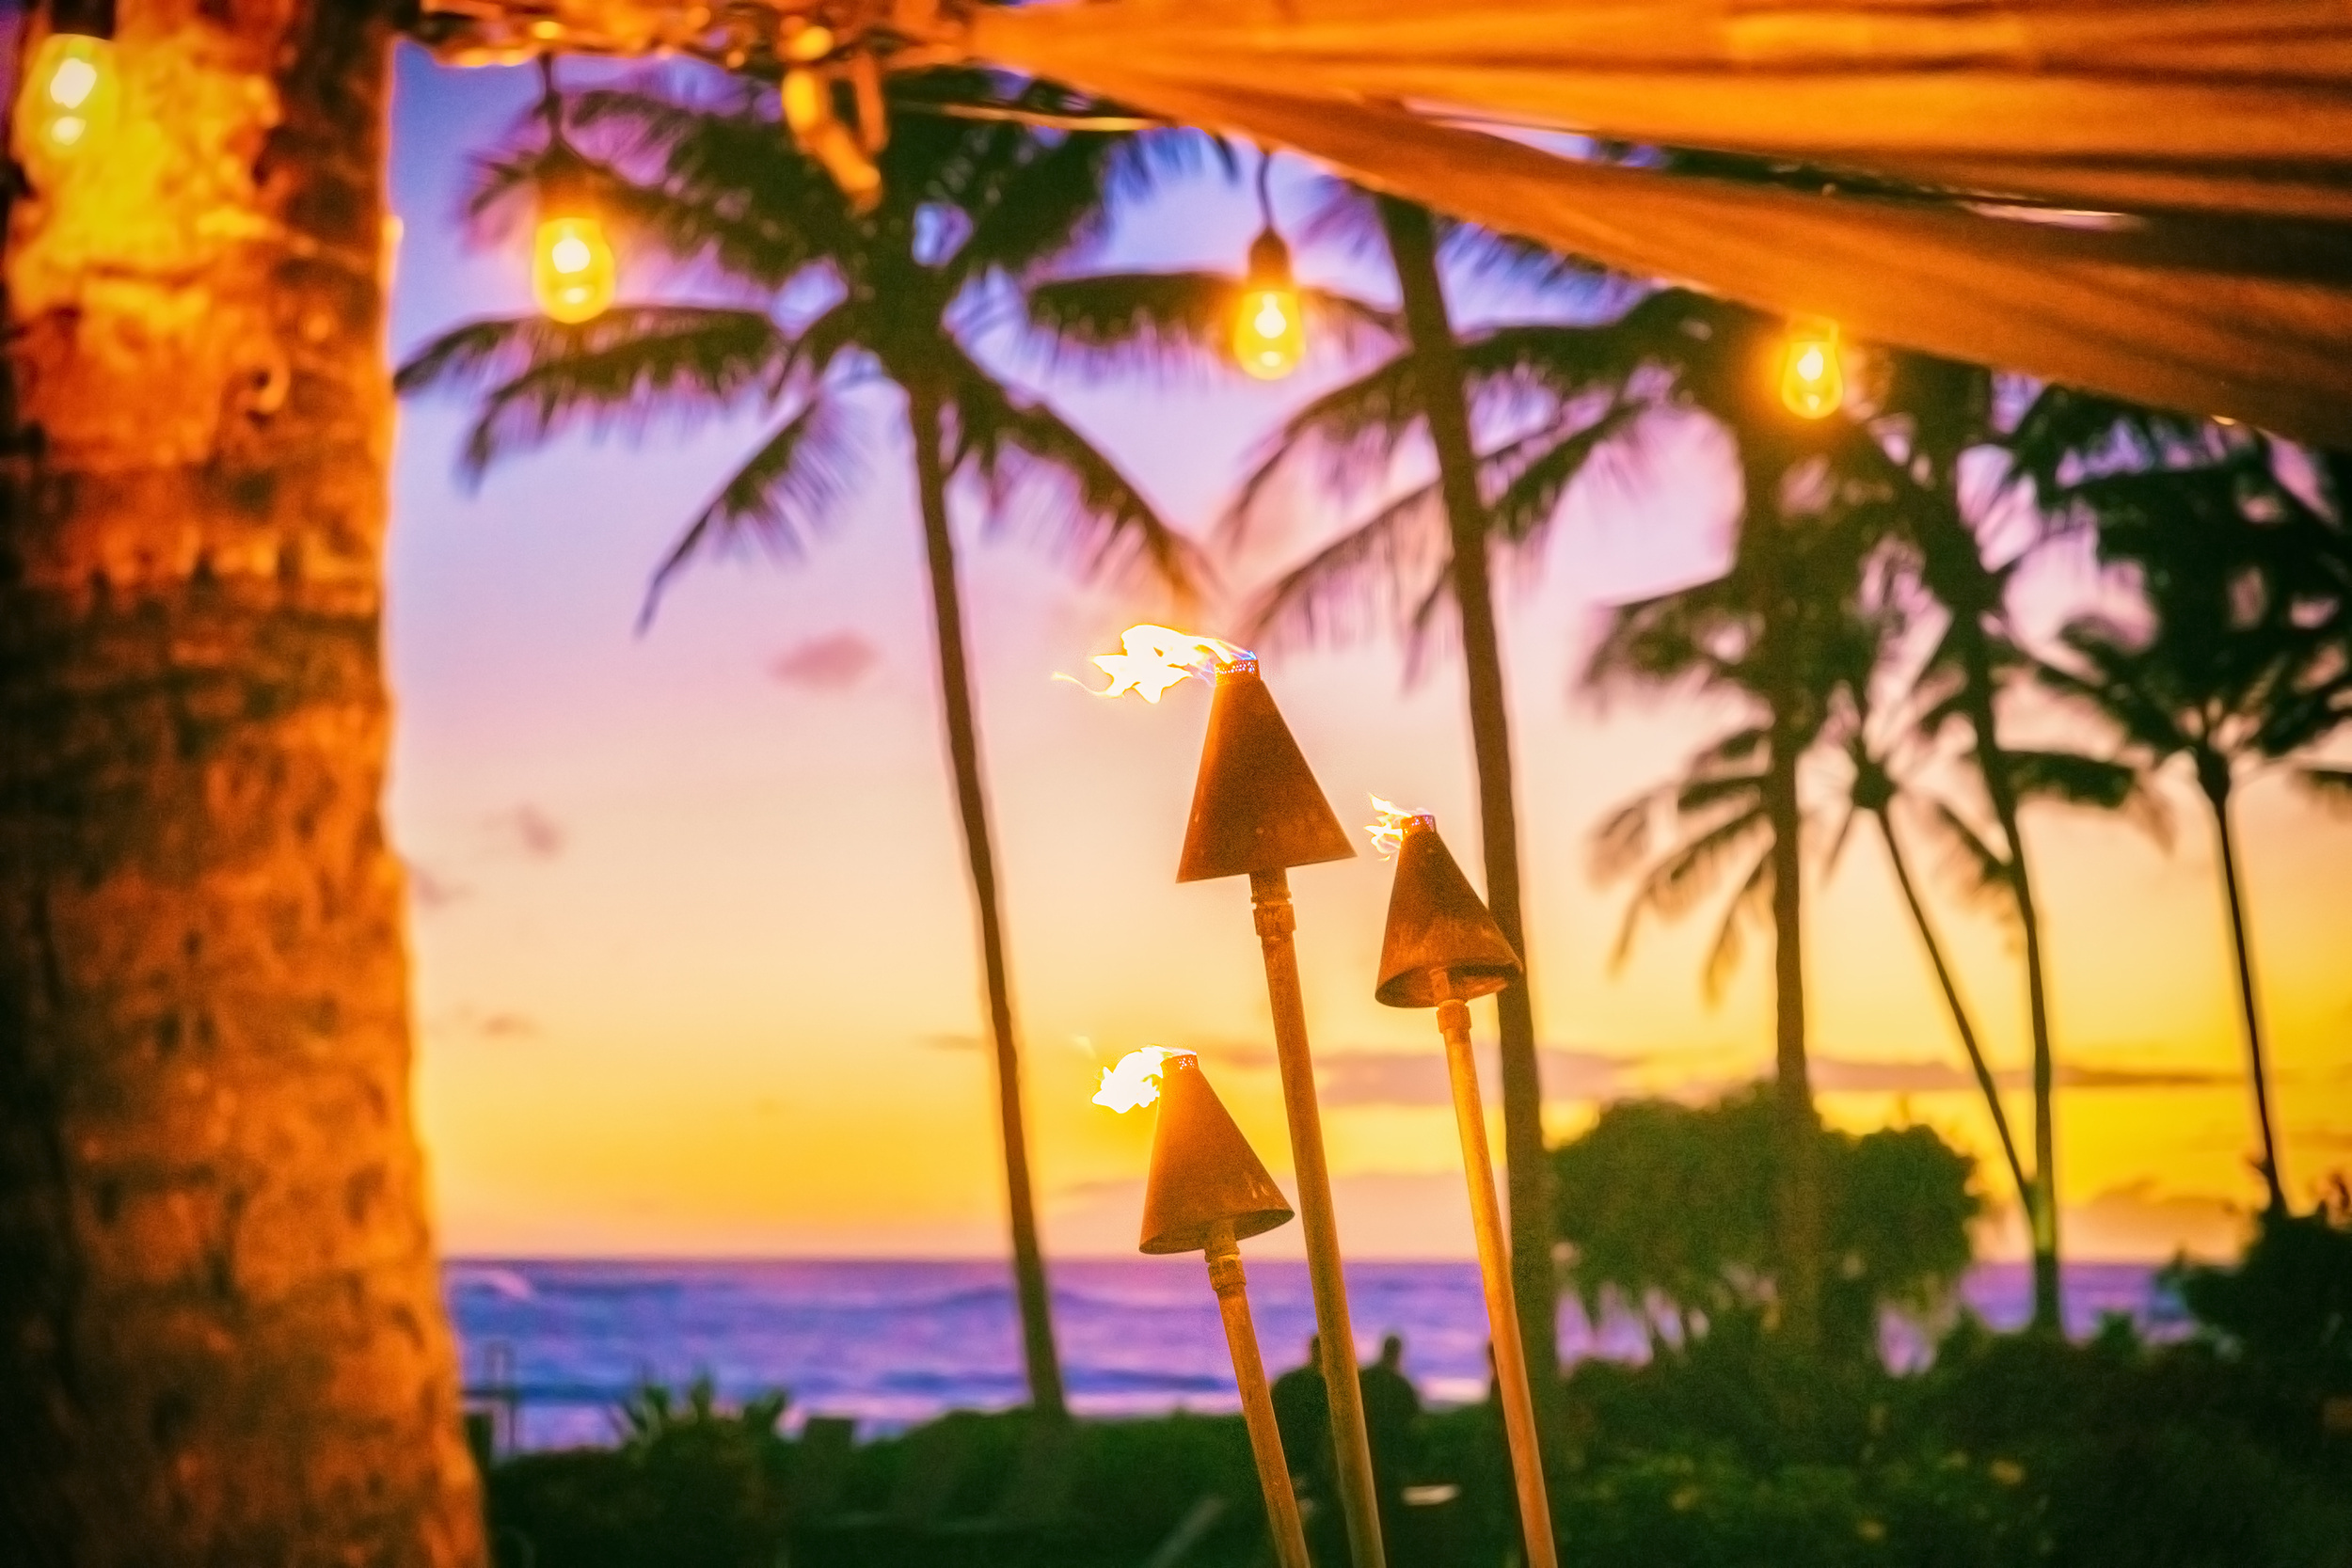 <p>If you can go to Hawaii for your bachelorette party, by all means, go to Hawaii. But if that's not feasible, bring Hawaii to you with a luau. If possible, host the party poolside and spend the entire day in your swimsuit before changing into a flowy dress for the evening. </p><p><a href='https://www.msn.com/en-us/community/channel/vid-cj9pqbr0vn9in2b6ddcd8sfgpfq6x6utp44fssrv6mc2gtybw0us'>Follow us on MSN to see more of our exclusive lifestyle content.</a></p>